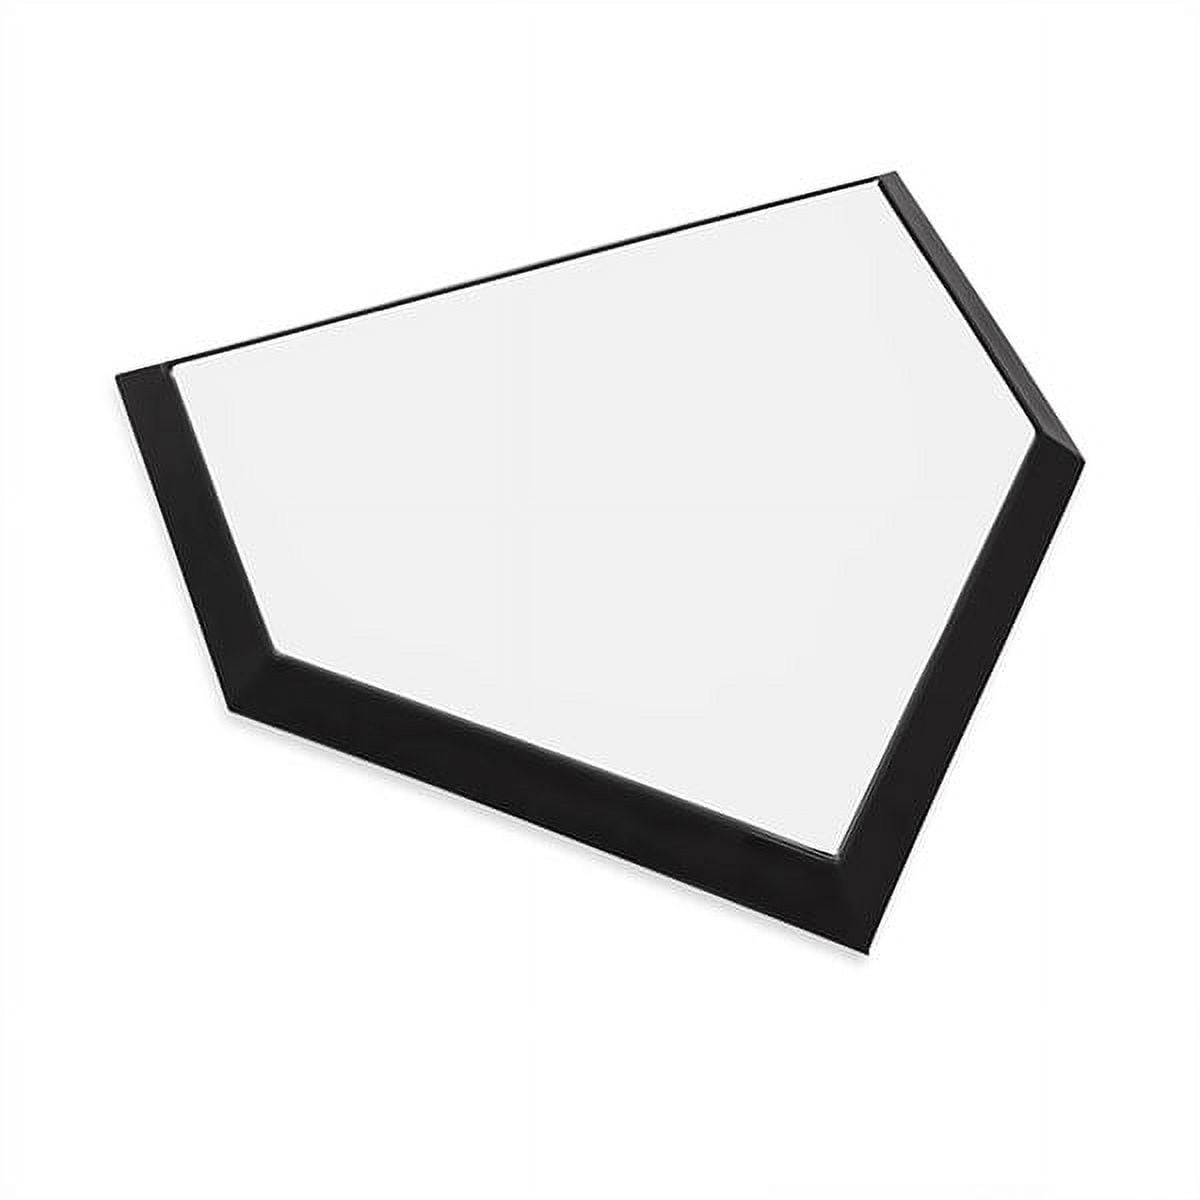 Picture of Champion Sports BH87 Pro Anchor Homeplate, Black & White